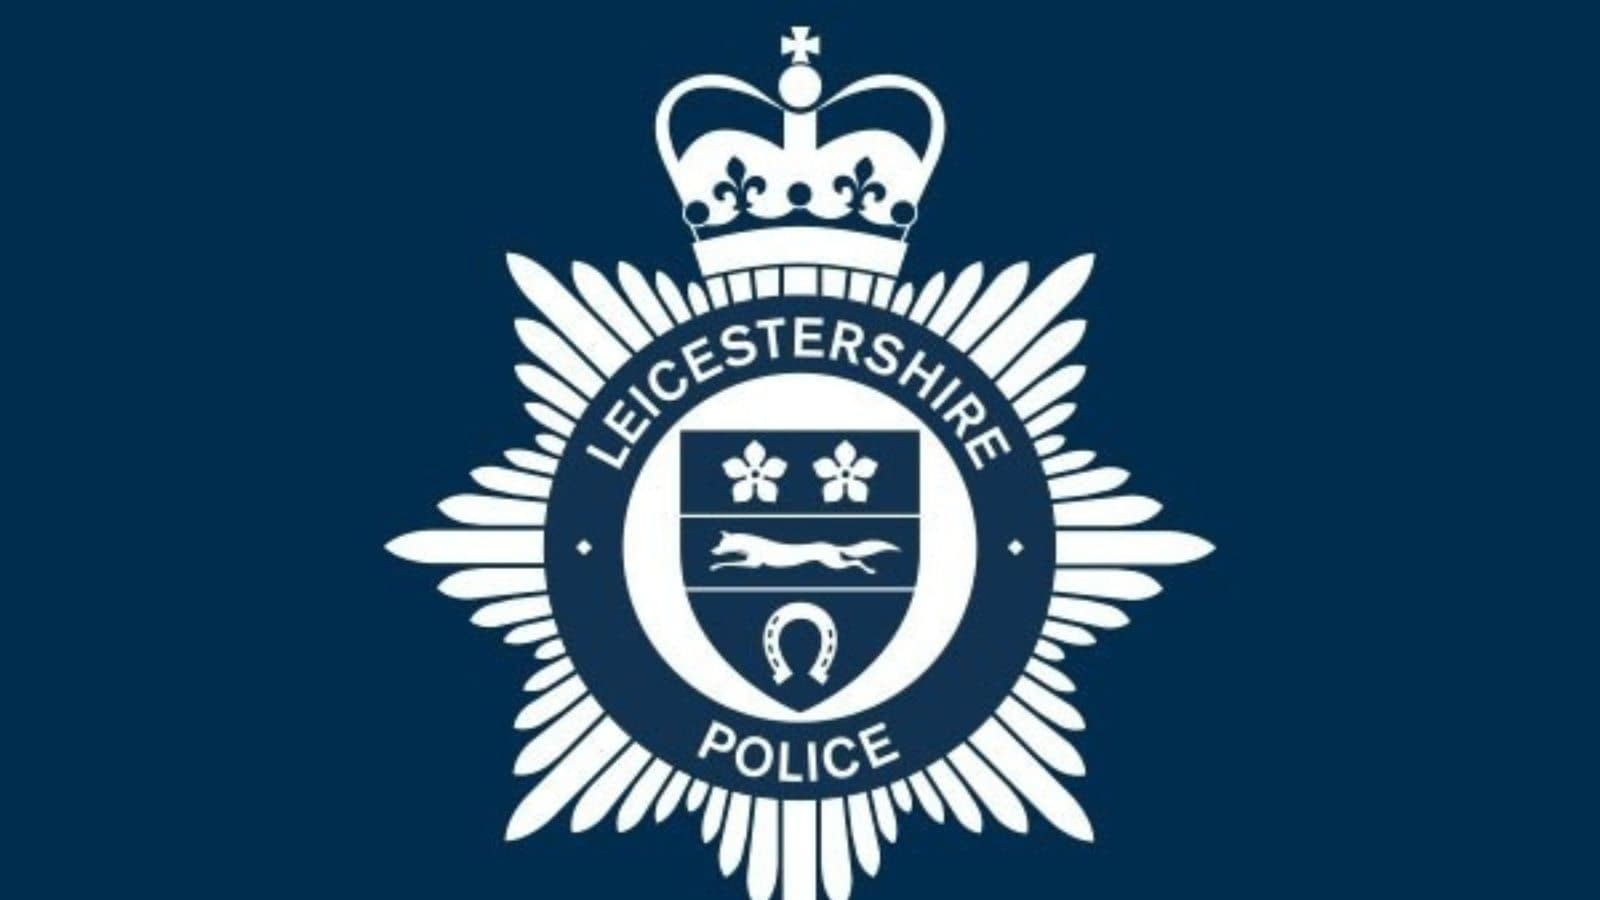 following-violence-in-wake-of-india-pak-cricket-match-police-impose-special-measures-in-uk-s-leicester